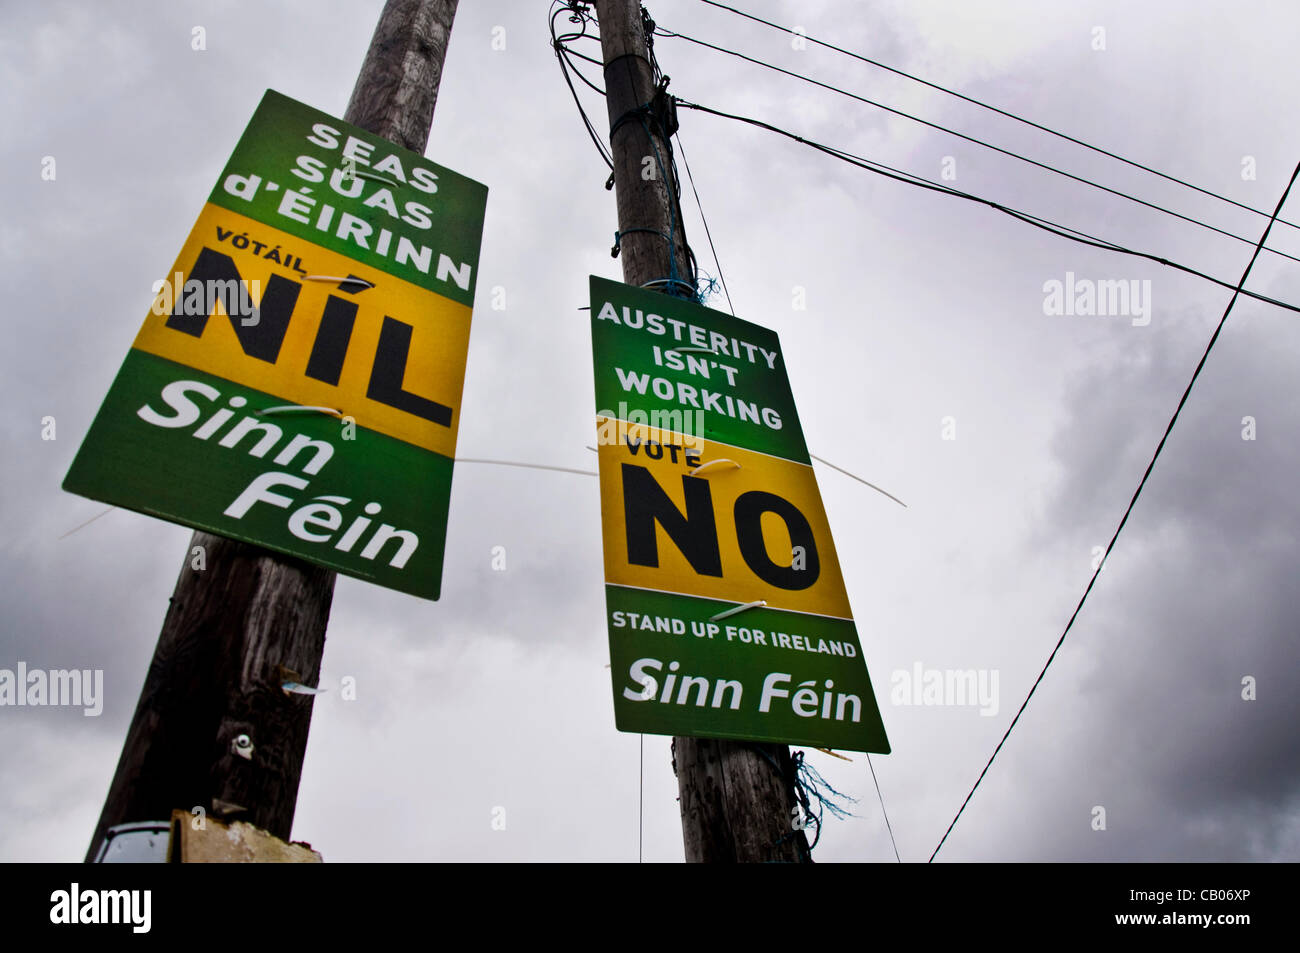 May 13th 2012.Ardara, County Donegal,Ireland. Sinn Fein posters in Gaelic and English urging a No Vote in the forthcoming referendum on Europe's new fiscal treaty held on May 31st 2012. Photo by:Richard Wayman/Alamy Stock Photo